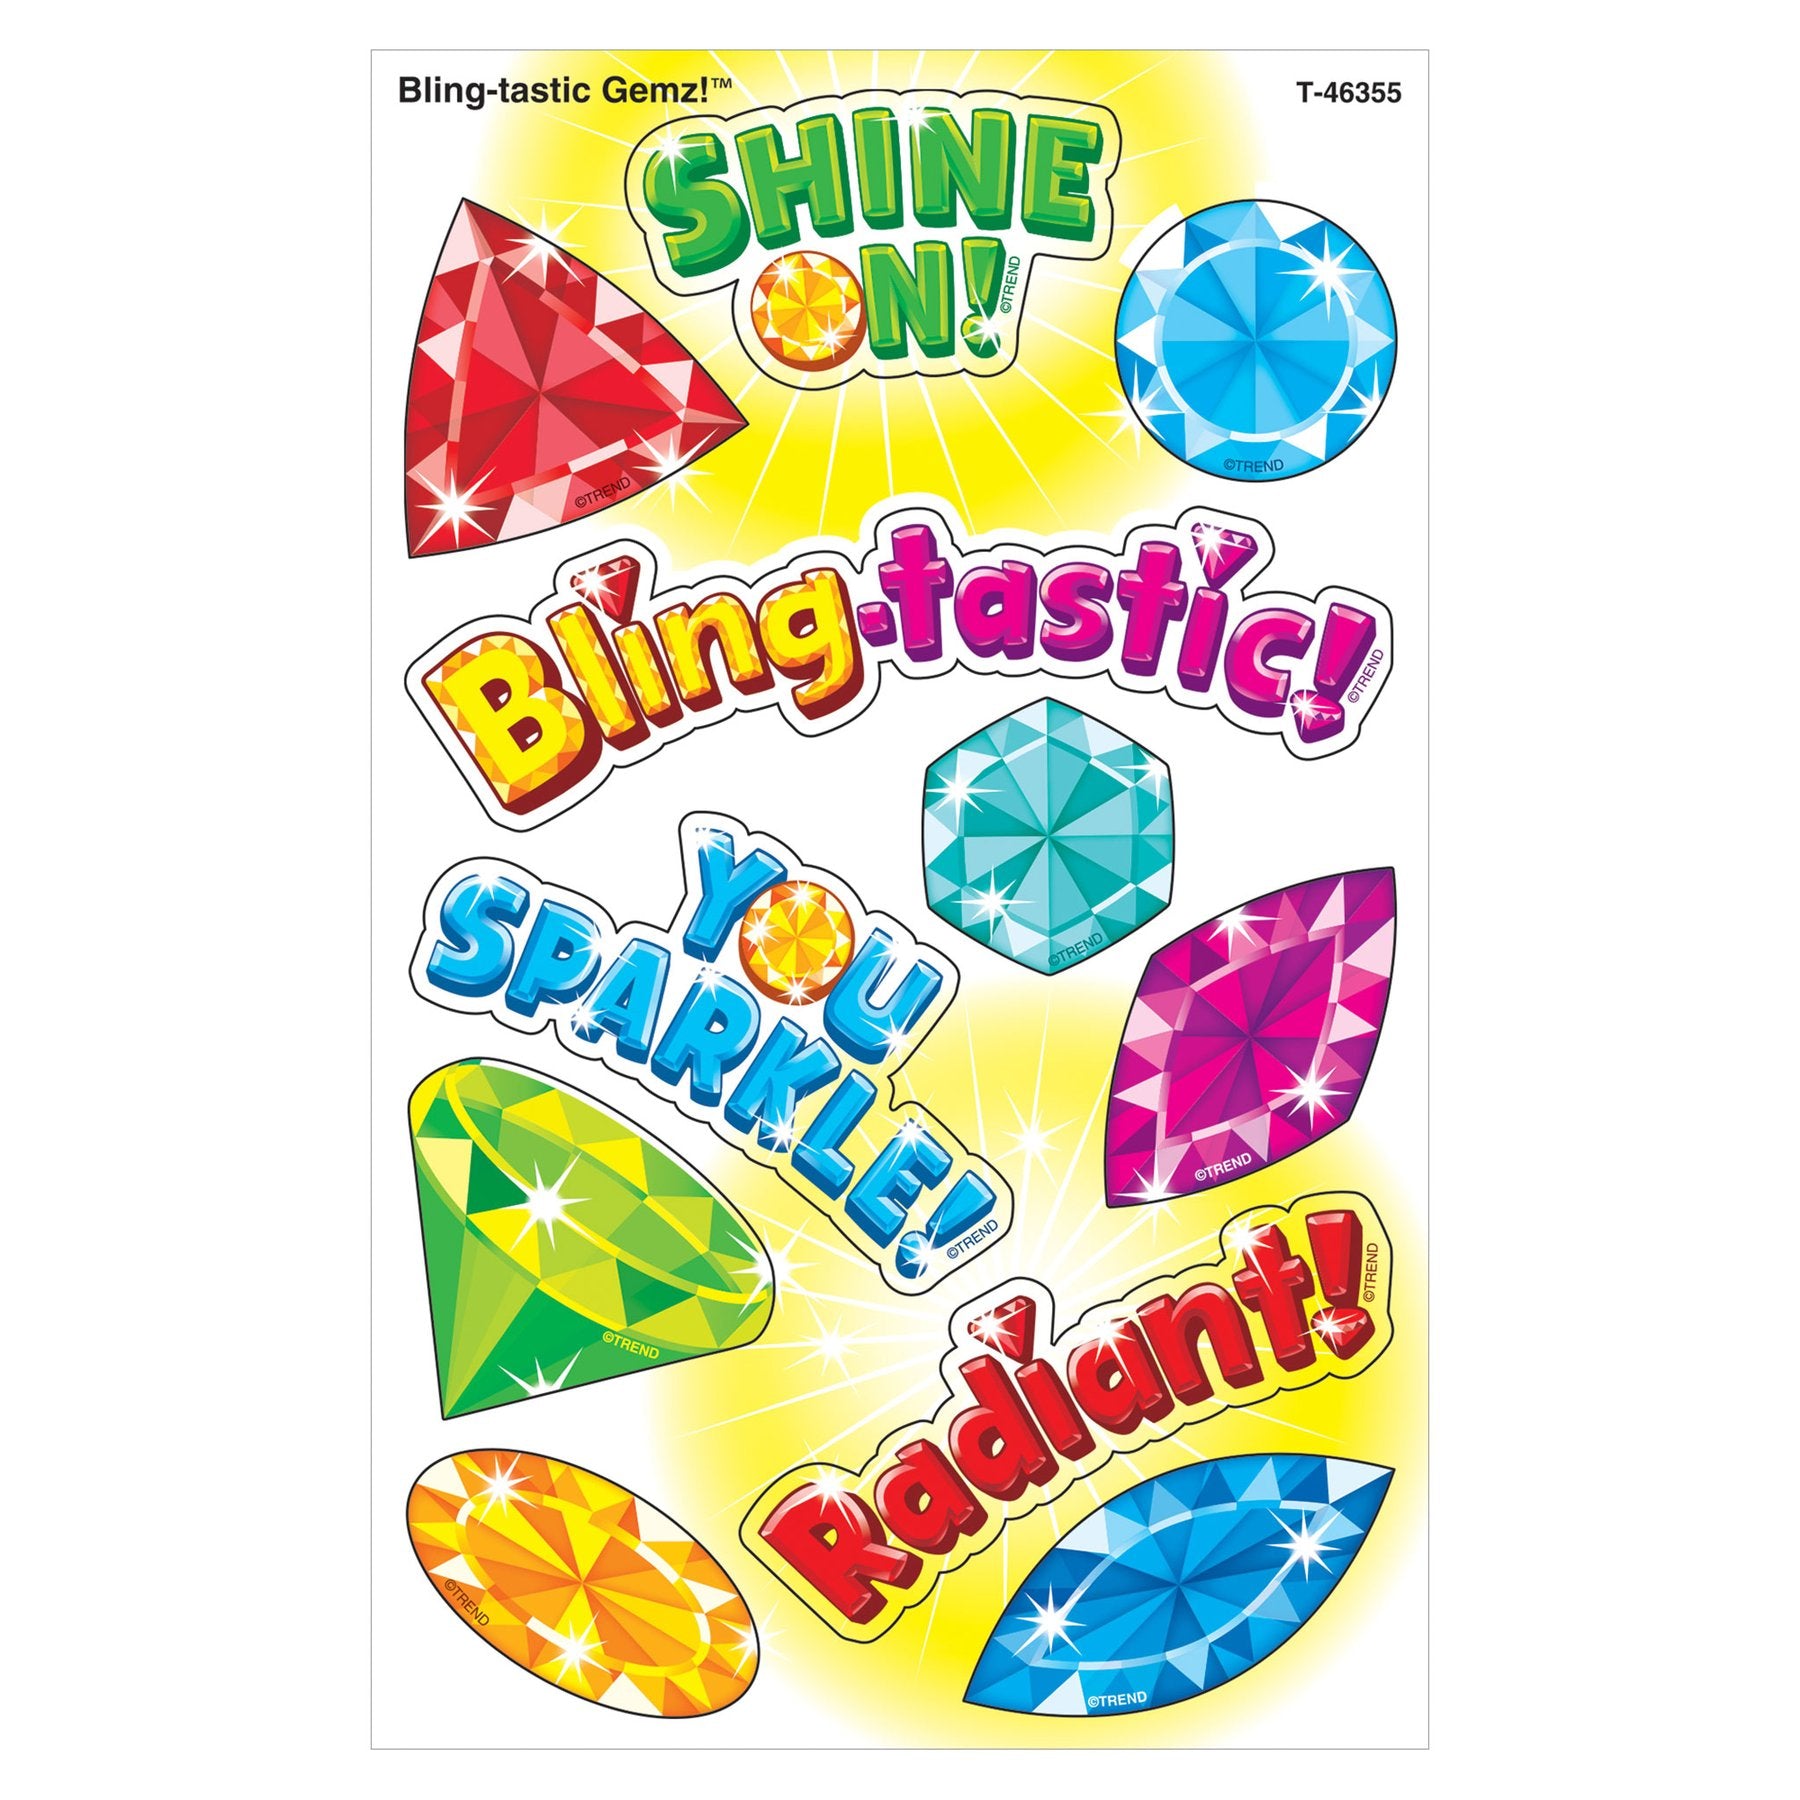 Bling-tastic Gemz!™ superShapes Stickers – Large